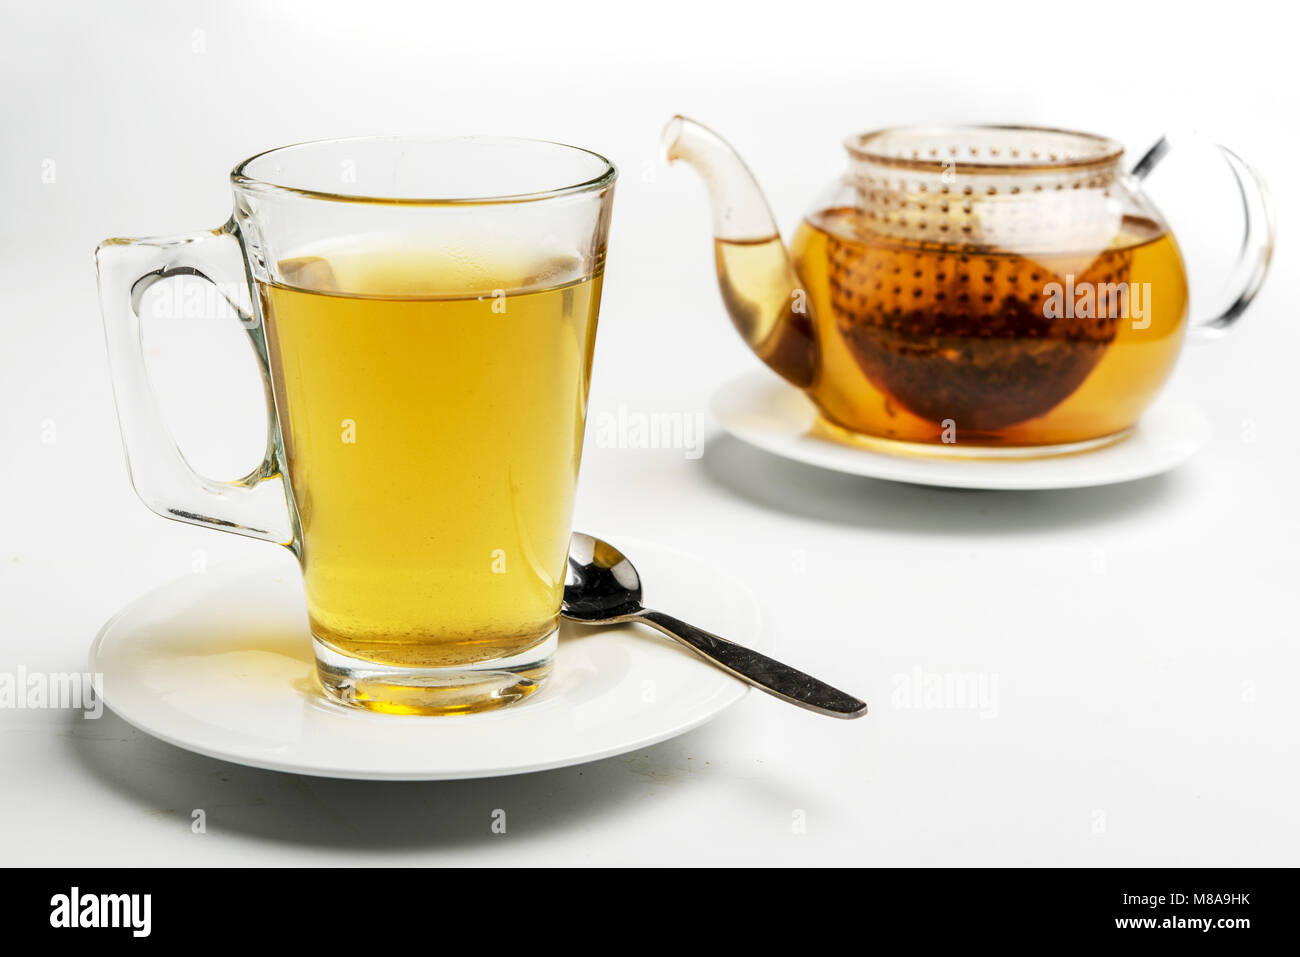 Glass of tea and teapot. The Tea bag can be seen in the pot Stock Photo